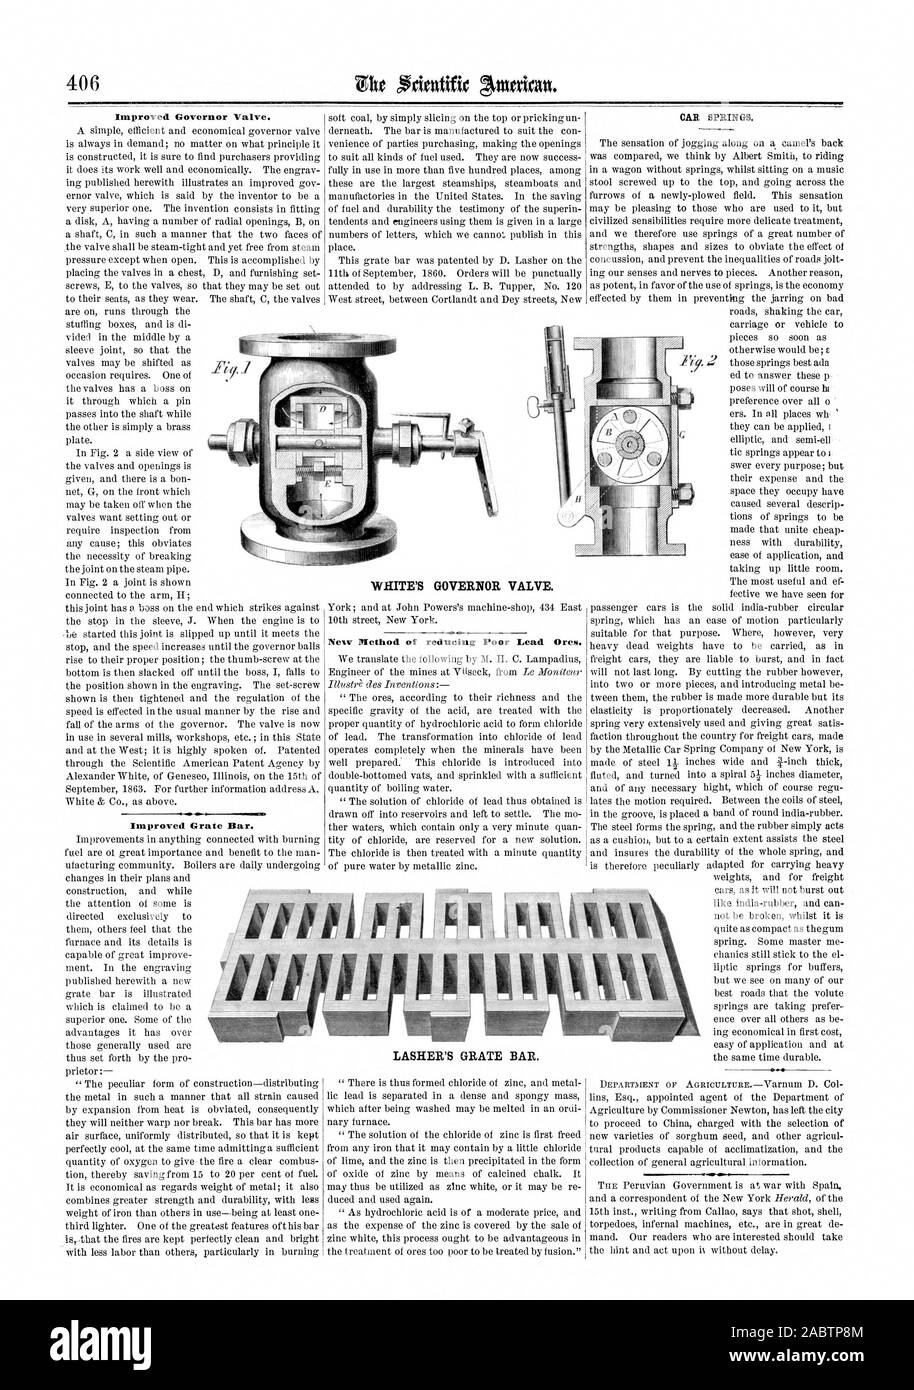 406  Improved Governor Valve. Improved Grate Bar. New Method of reducing Poor Lead Ores. CAR SPRINGS. WHITE'S GOVERNOR VALVE. LASHER'S GRATE BAR., scientific american, 1864-06-25 Stock Photo